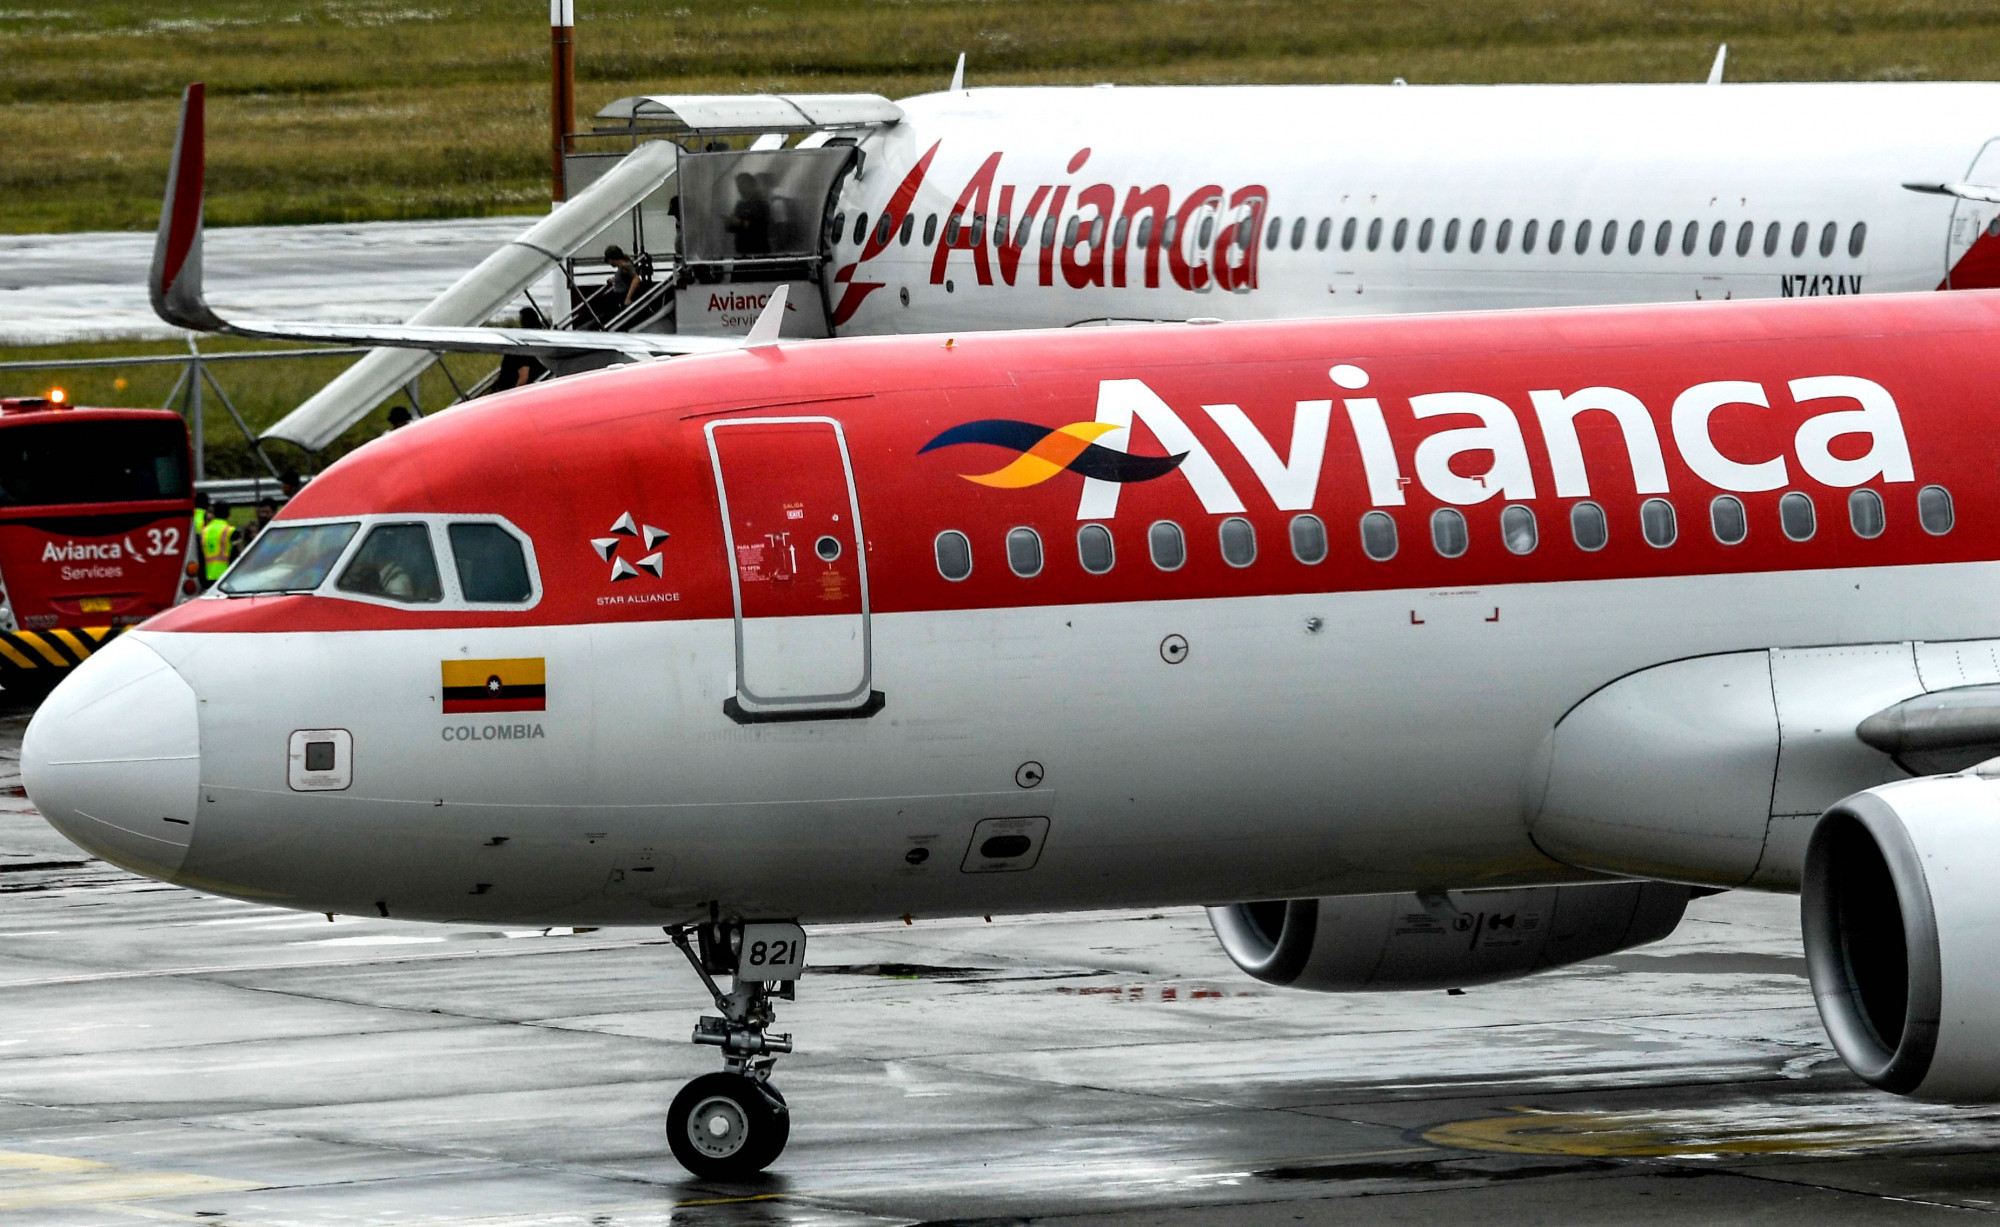 World’s SecondOldest Airline, Avianca, Driven to Bankruptcy by CCP Virus